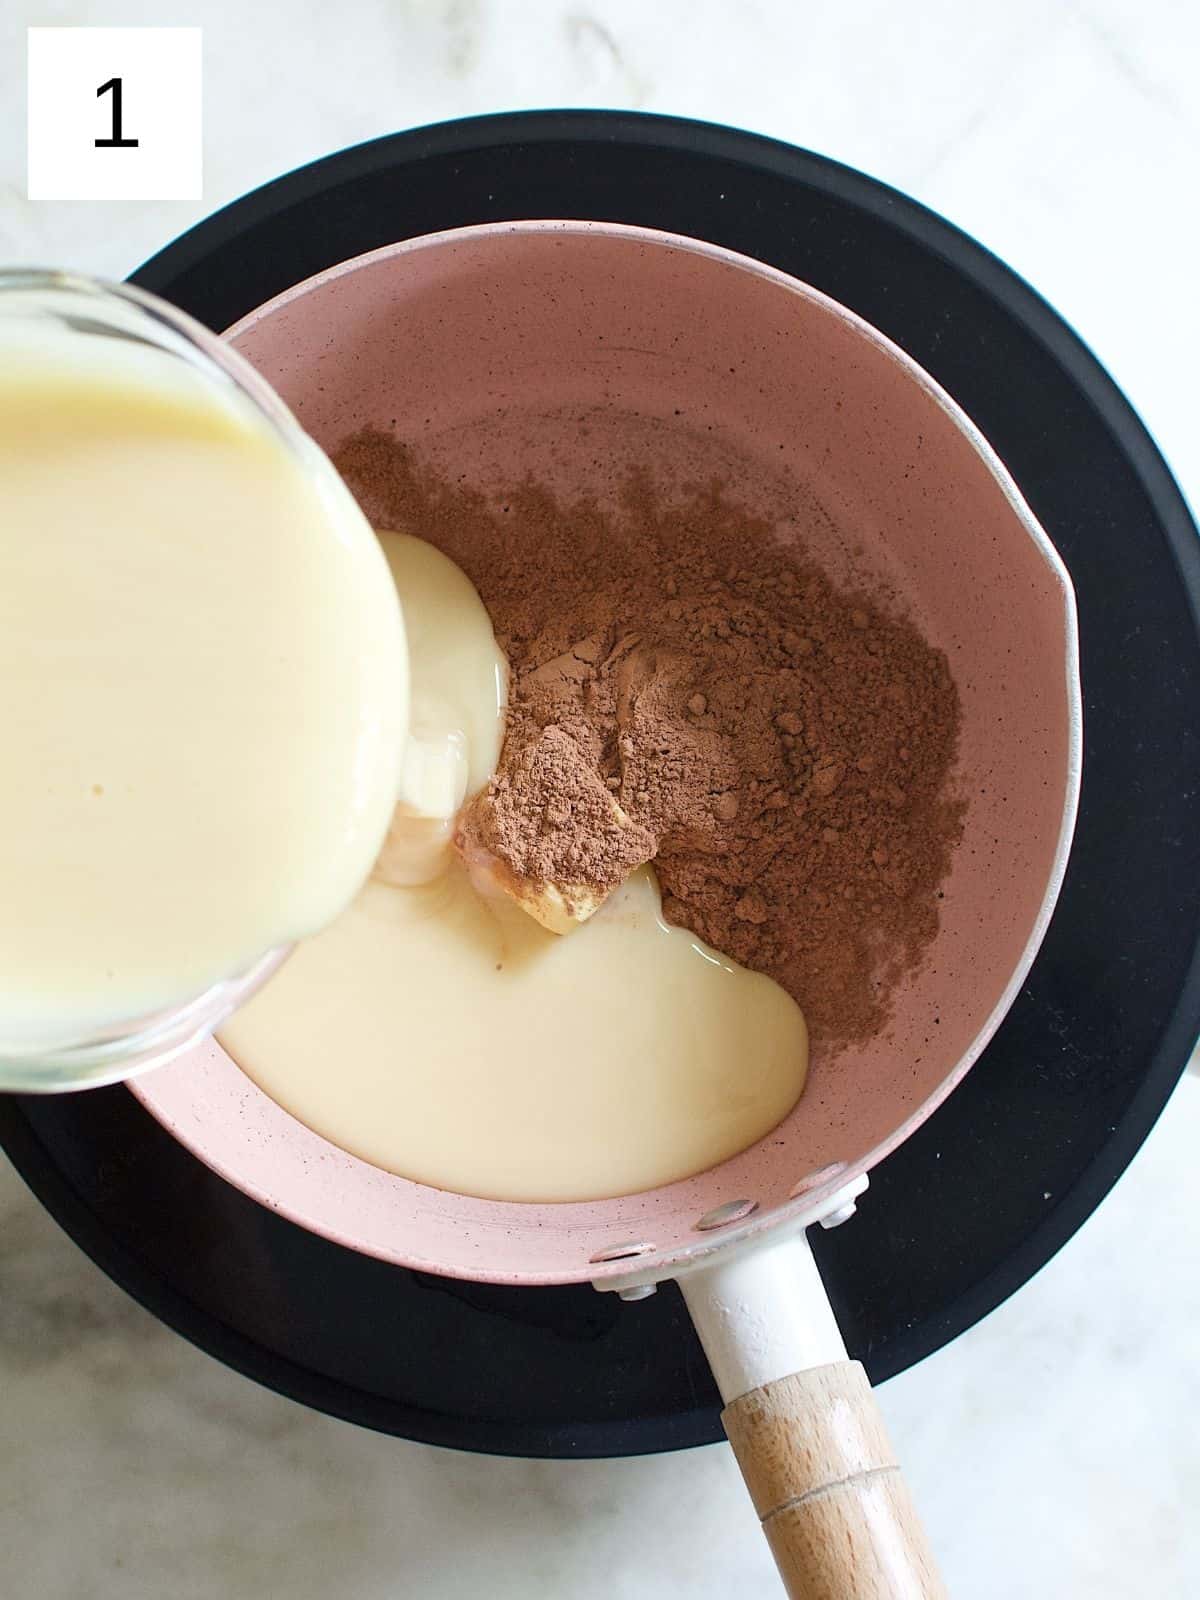 combining the butter, sweetened condensed milk, and cocoa powder in a saucepan.